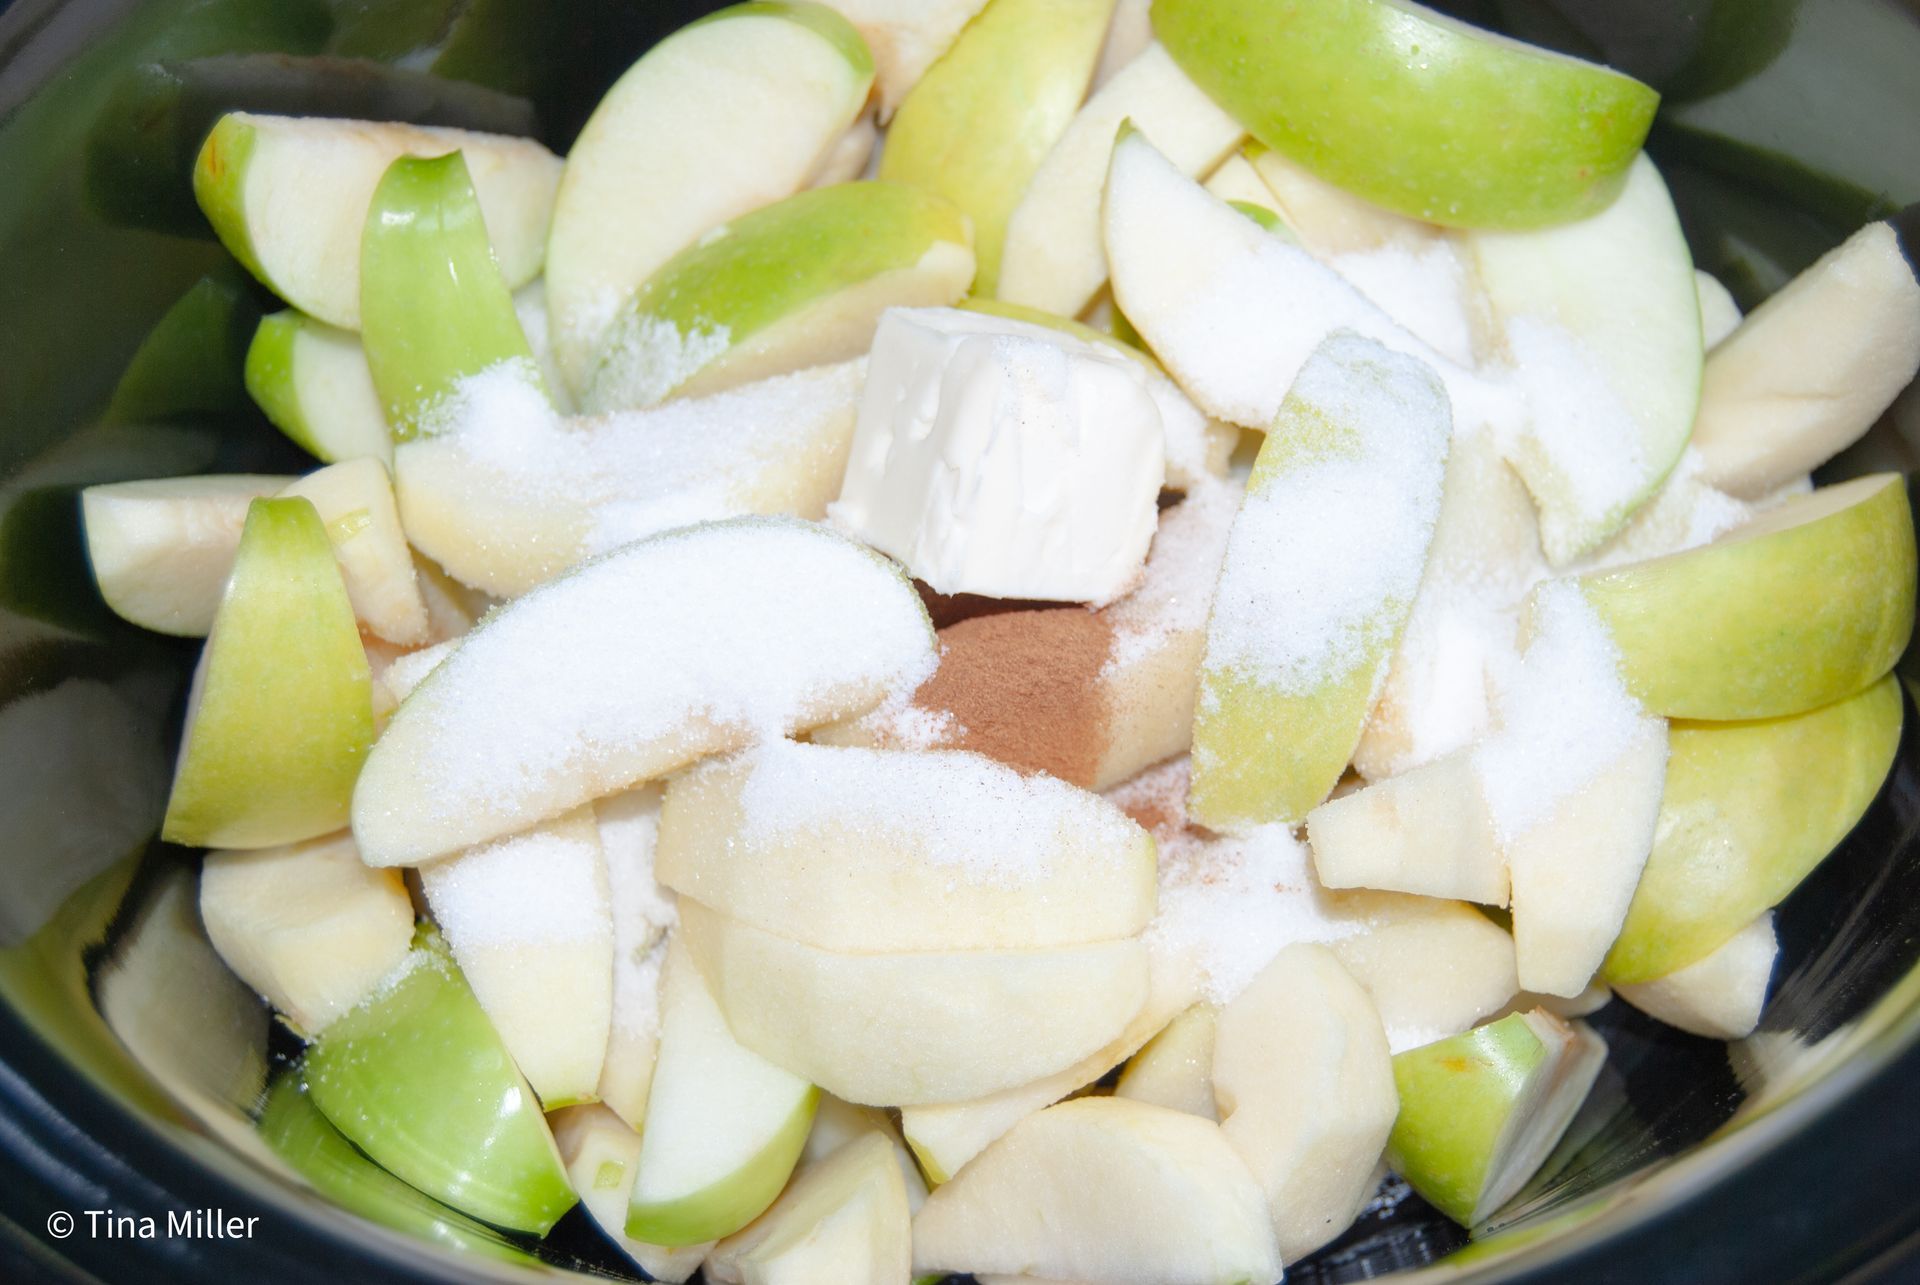 Granny Smith apples slices with skins left on some, piled high inside a crockpot topped with sugar, butter, and cinnamon.